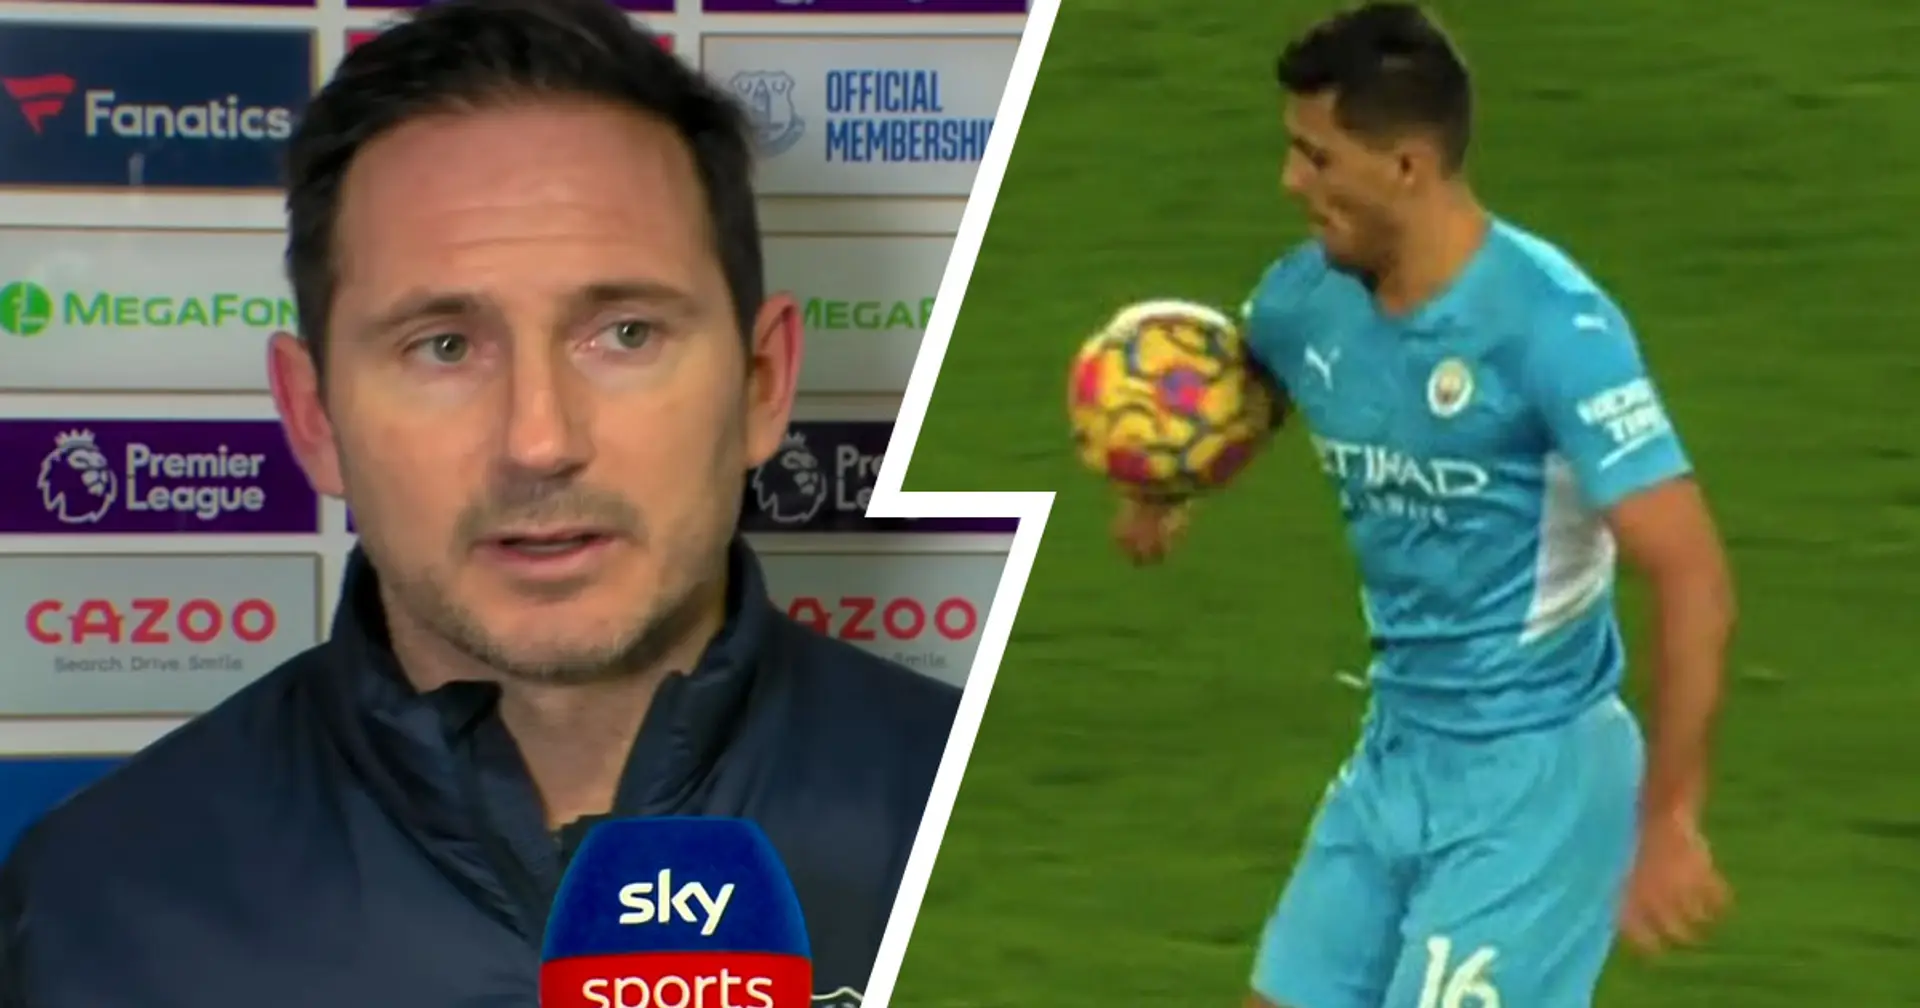 'There's no probably about it': Frank Lampard rages at officials after Everton denied penalty for Rodri handball in City loss